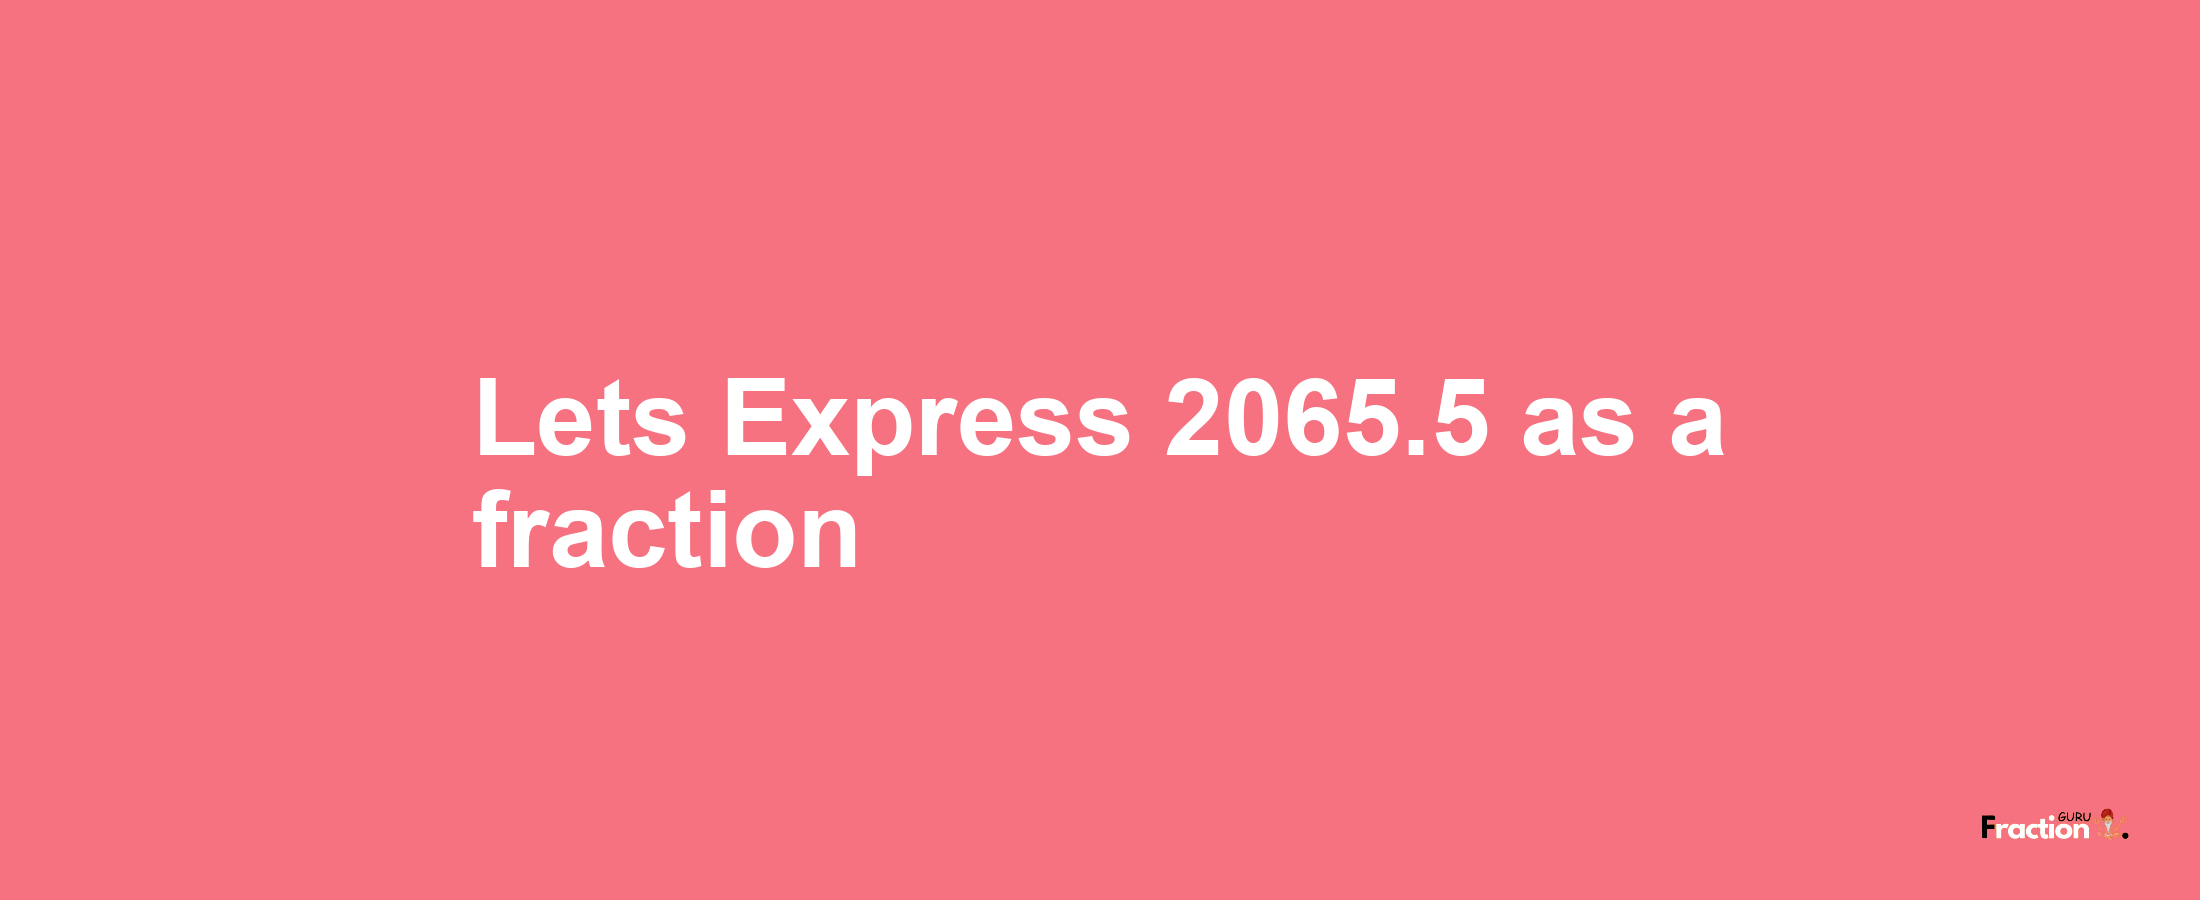 Lets Express 2065.5 as afraction